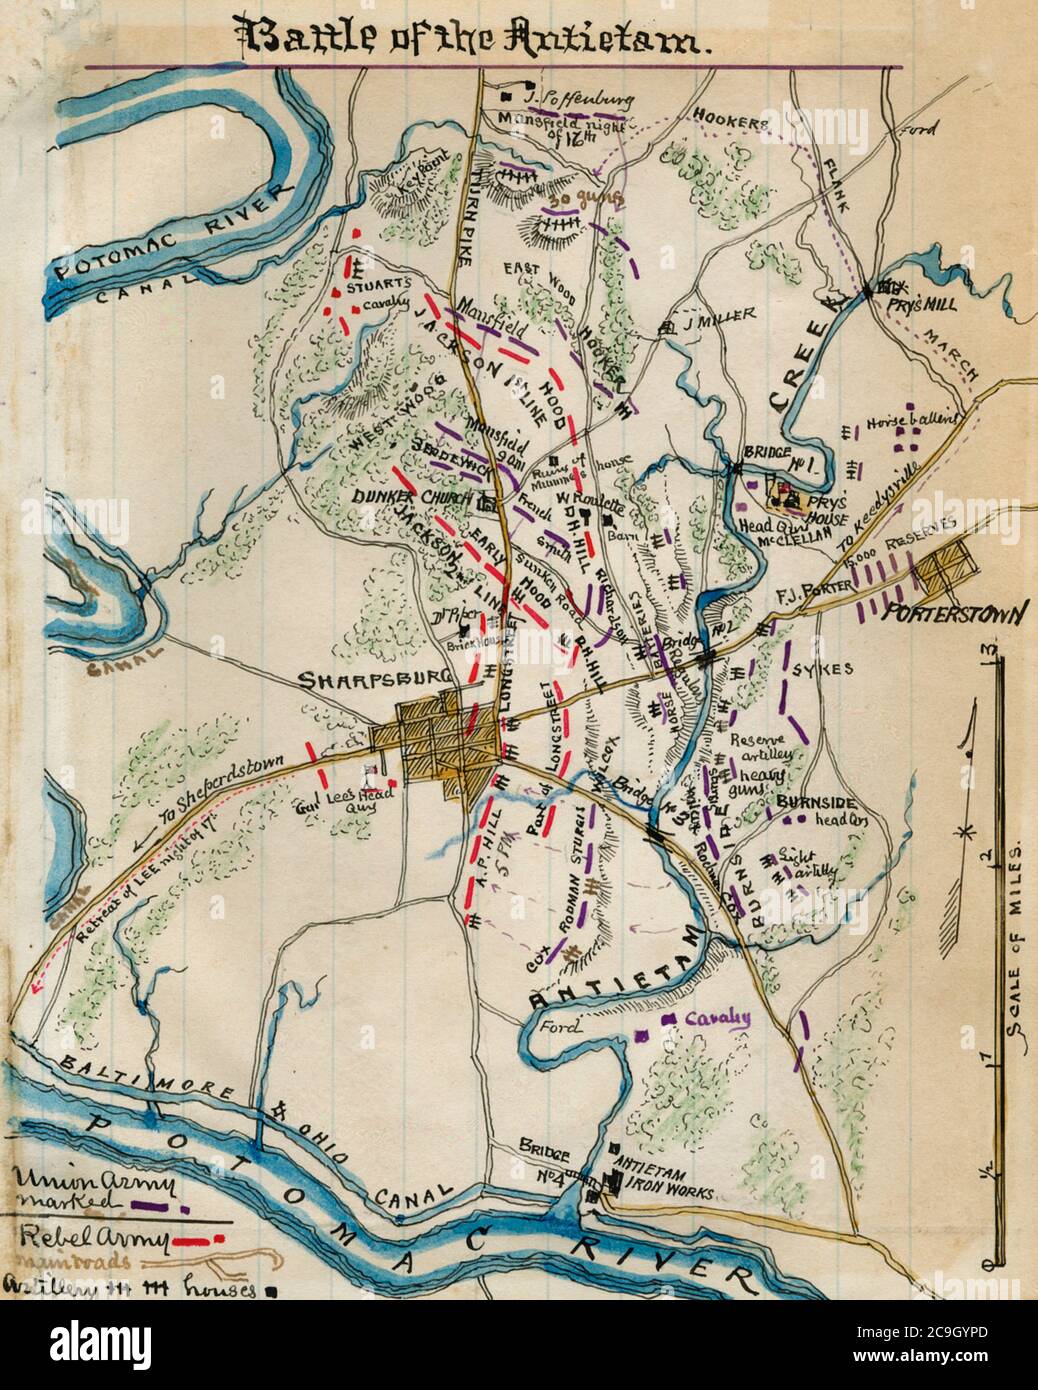 Battle of Antietam - Conveys the placement of Union and Confederate forces in Washington County, Md., around Sharpsburg during the Battle of Antietam on September 17, 1862 Stock Photo